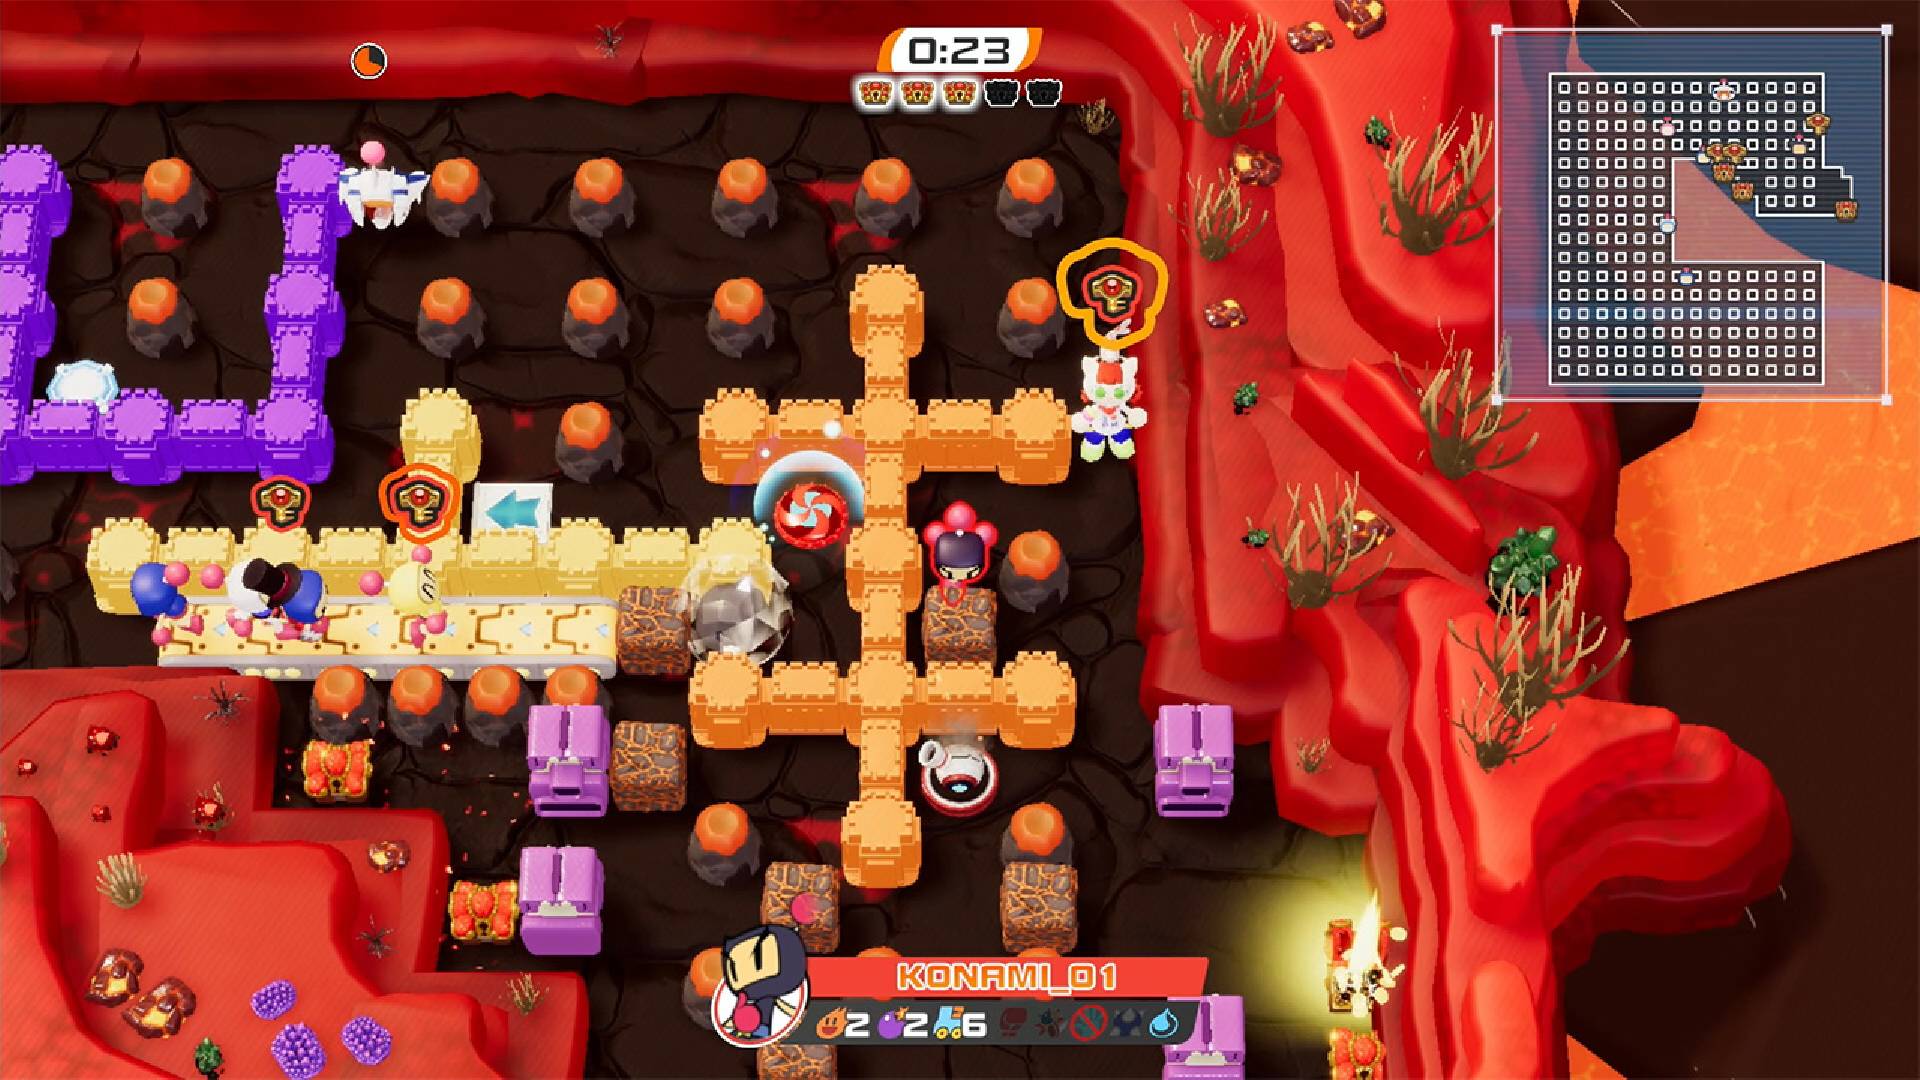 Gaming gets explosive with release of Super Bomberman R 2